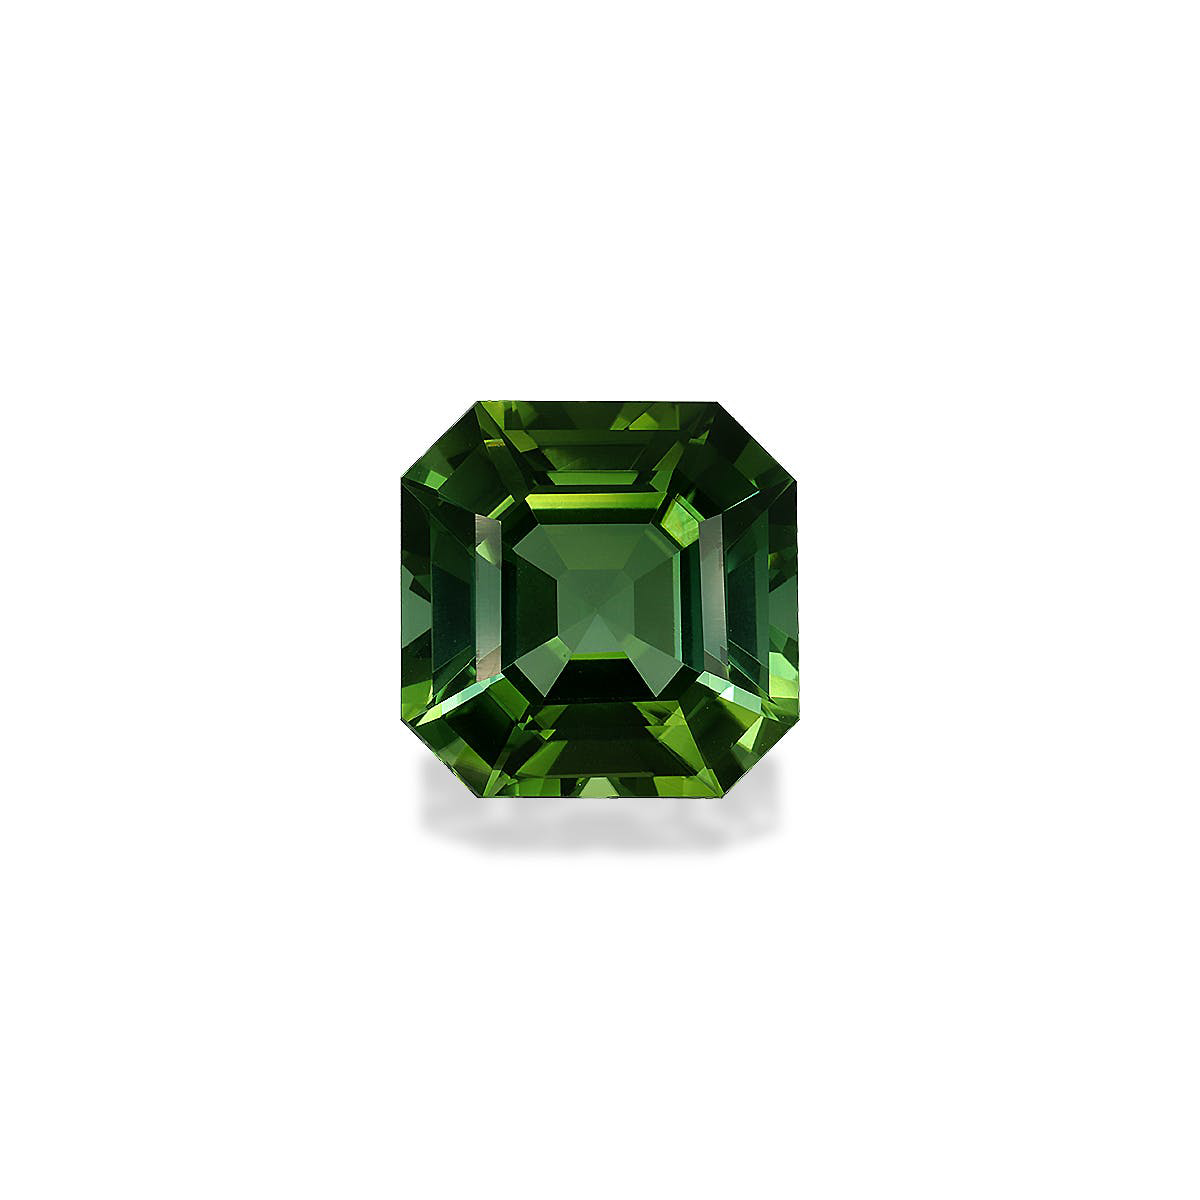 Picture of Green Tourmaline 15.11ct - 14mm (TG0315)